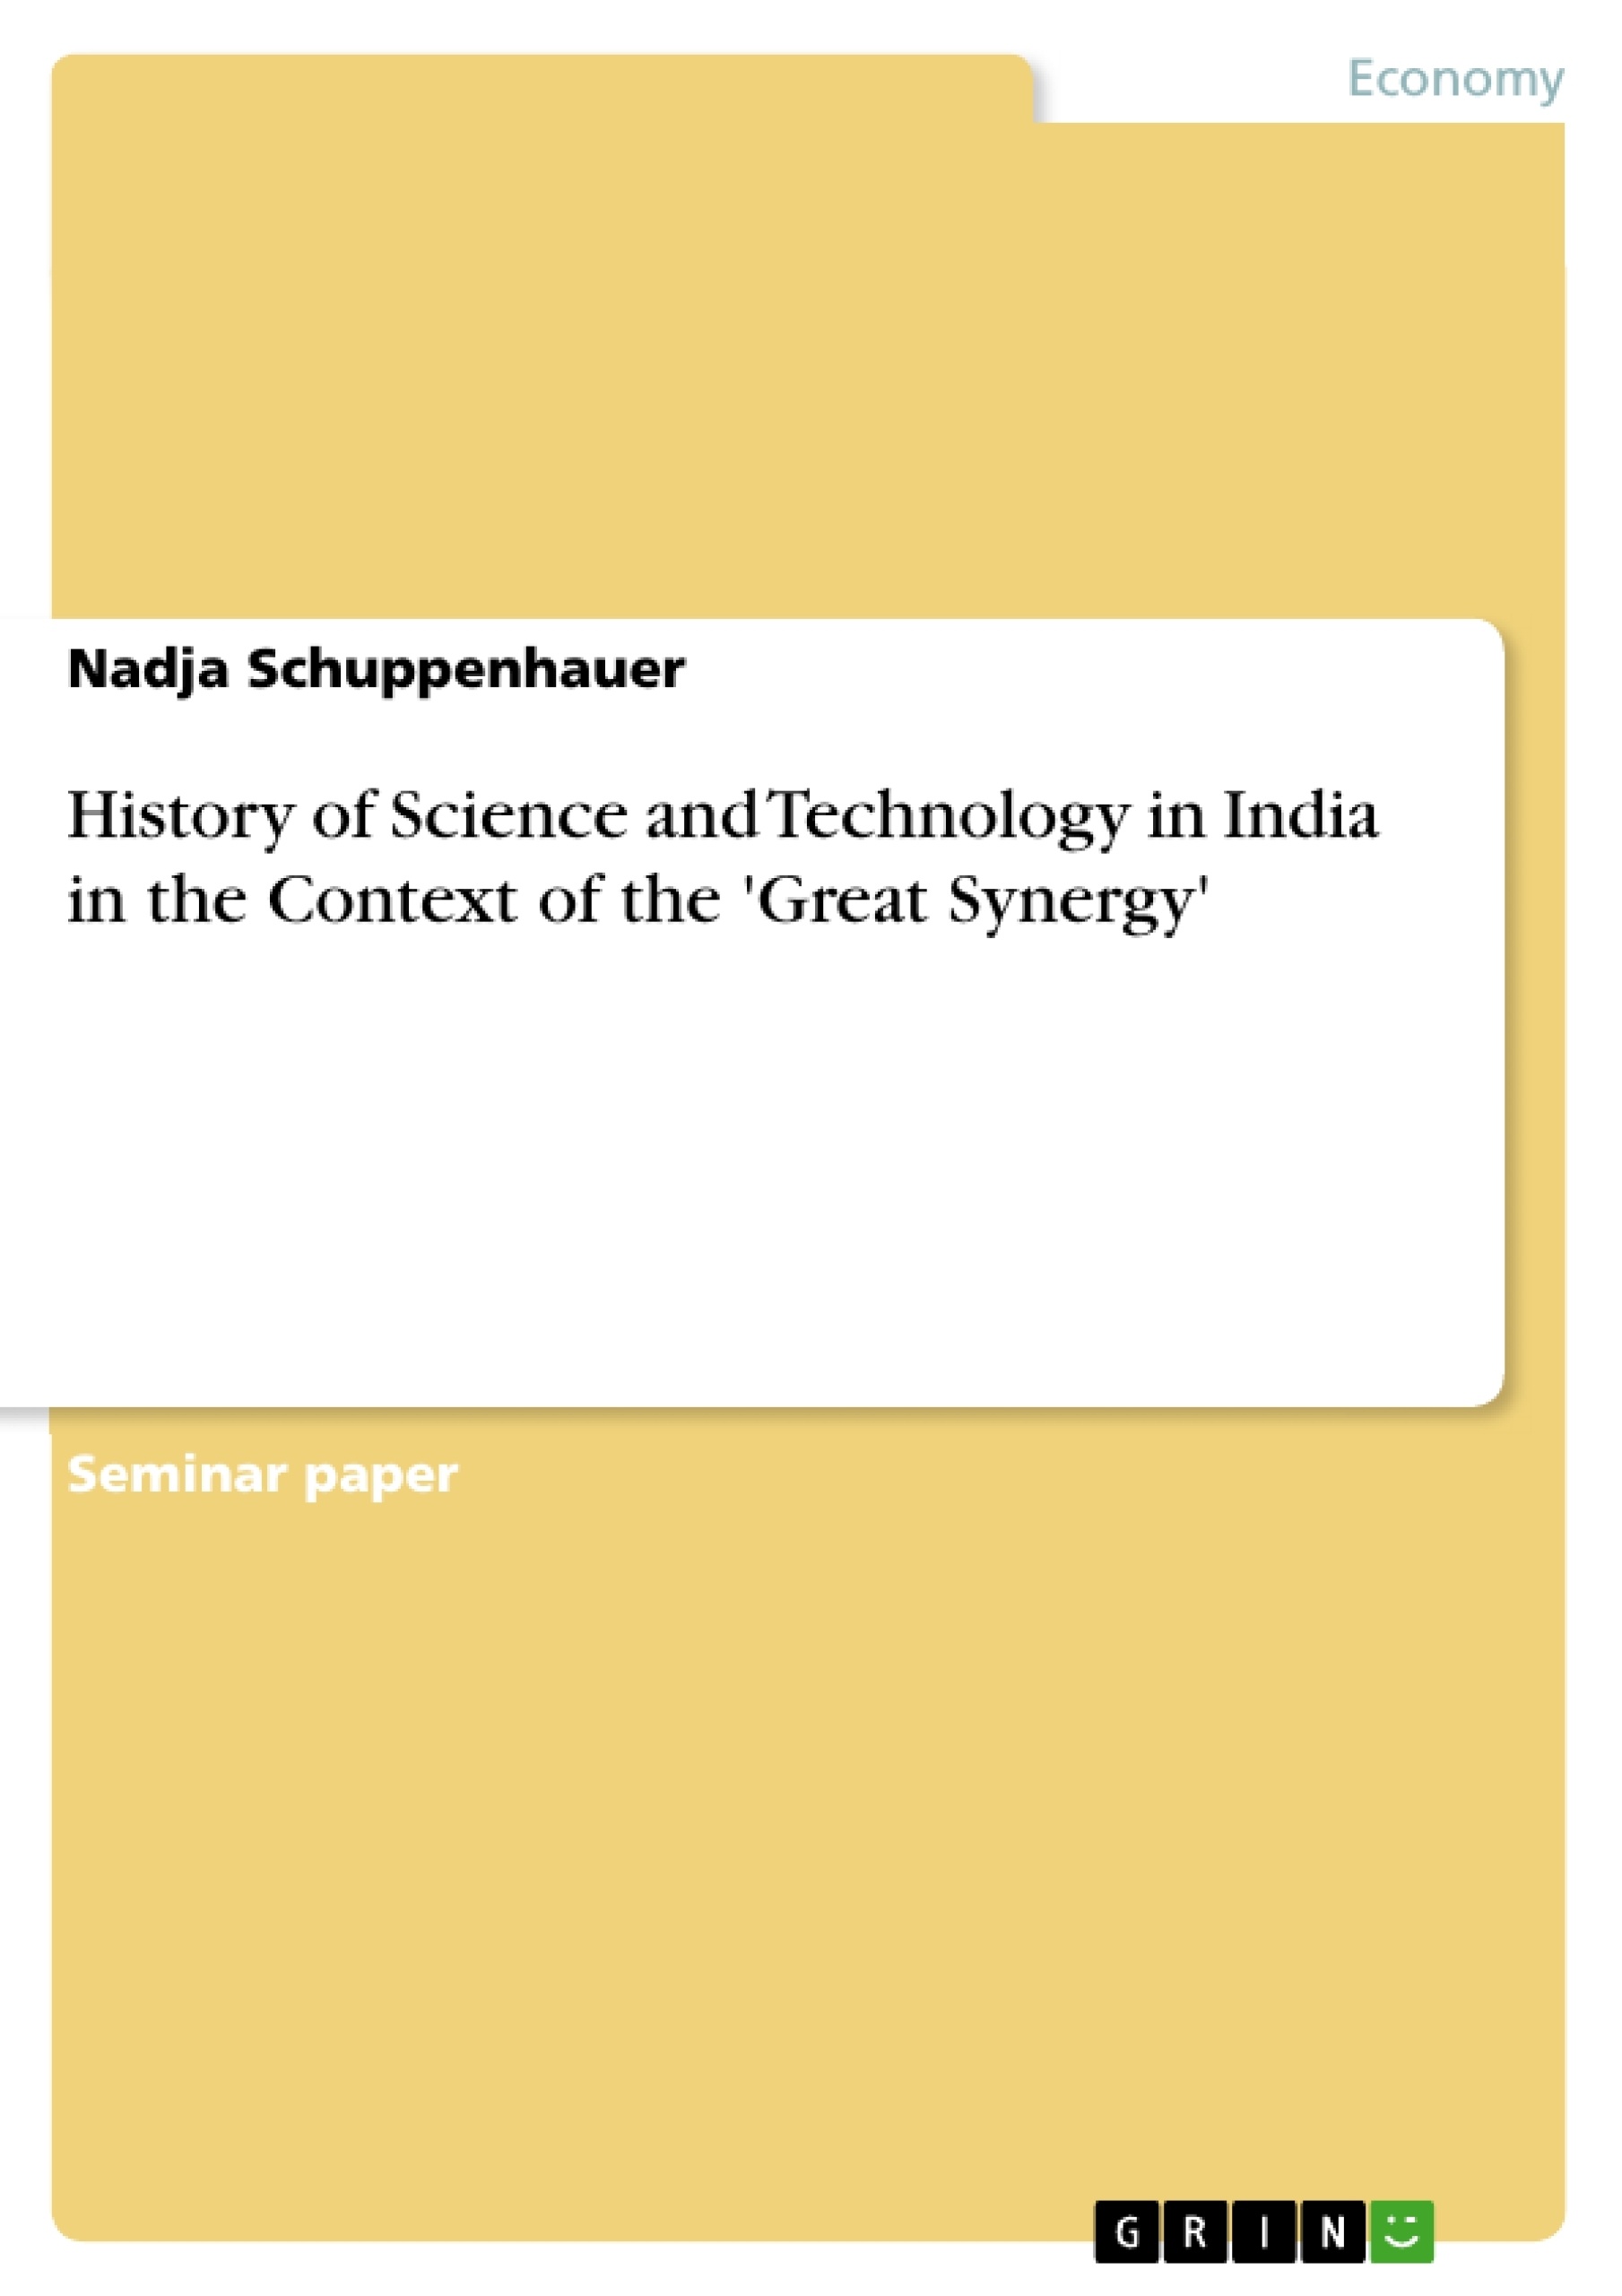 Titre: History of Science and Technology in India in the Context of the 'Great Synergy'